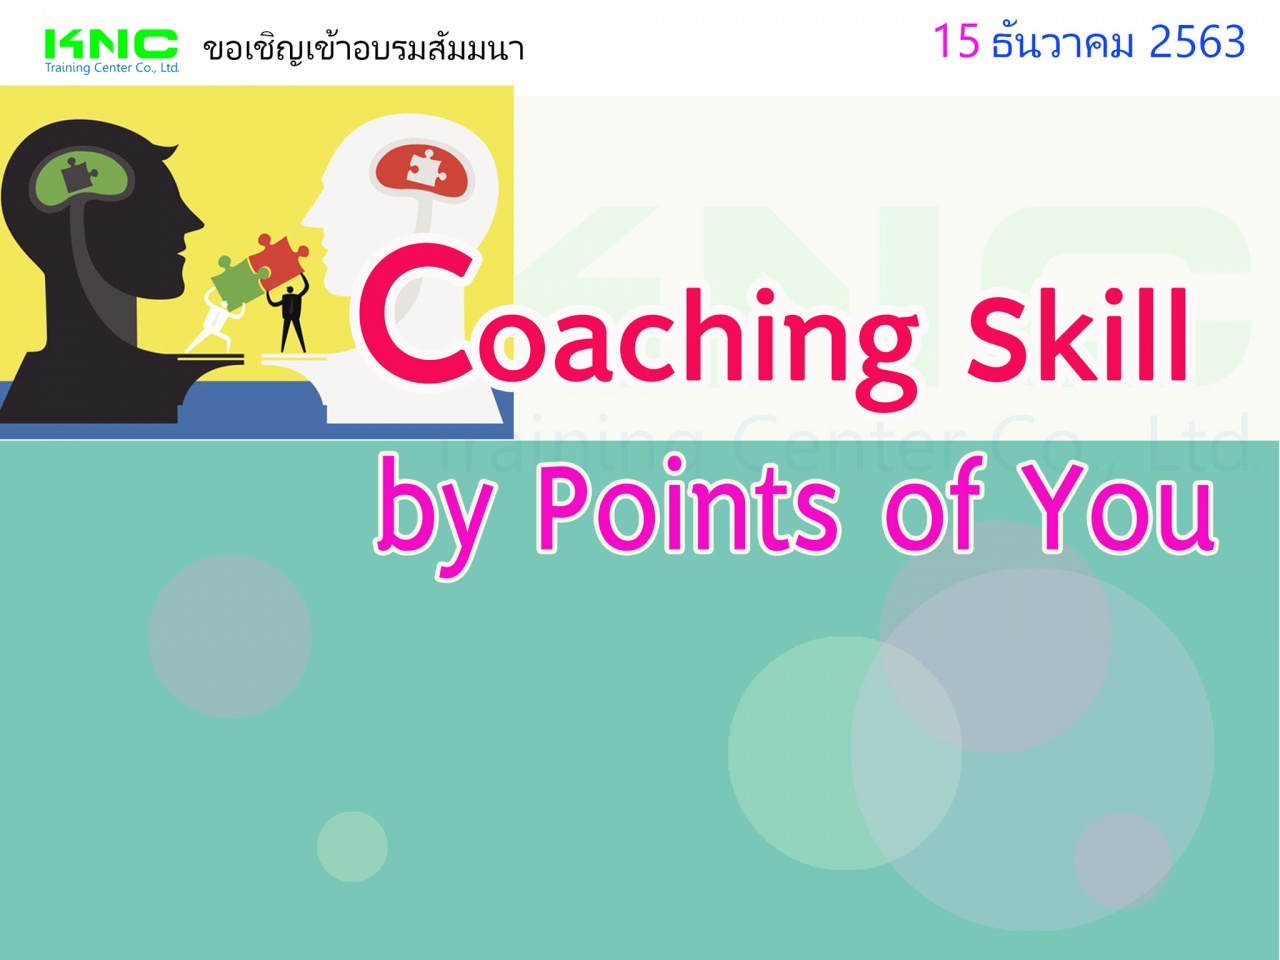 Coaching Skill by Points of You